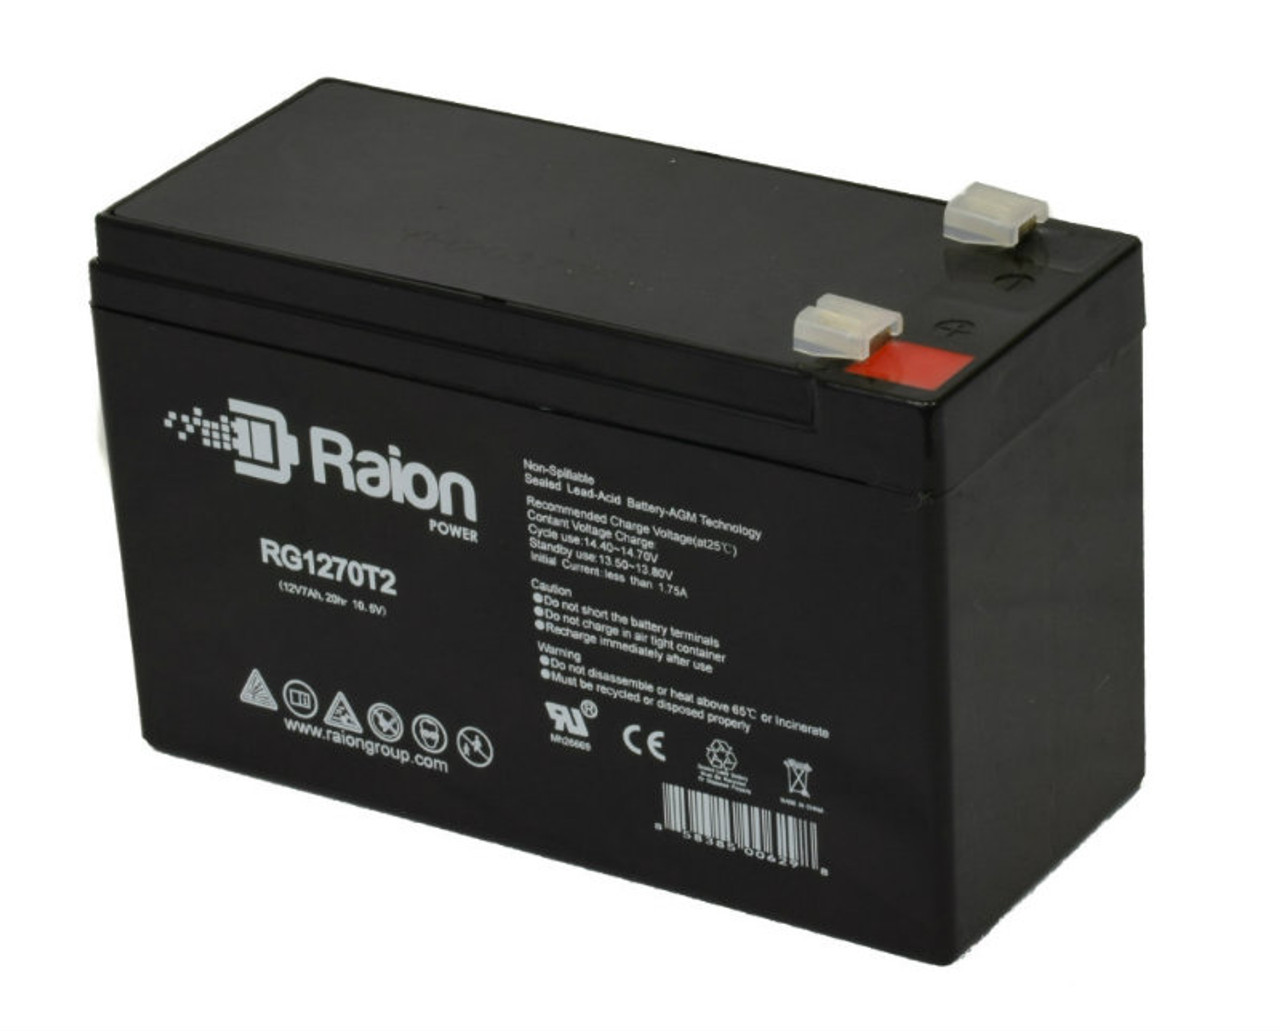 Raion Power RG1270T1 12V 7Ah Non-Spillable Replacement Battery for Power Sonic PS-1272